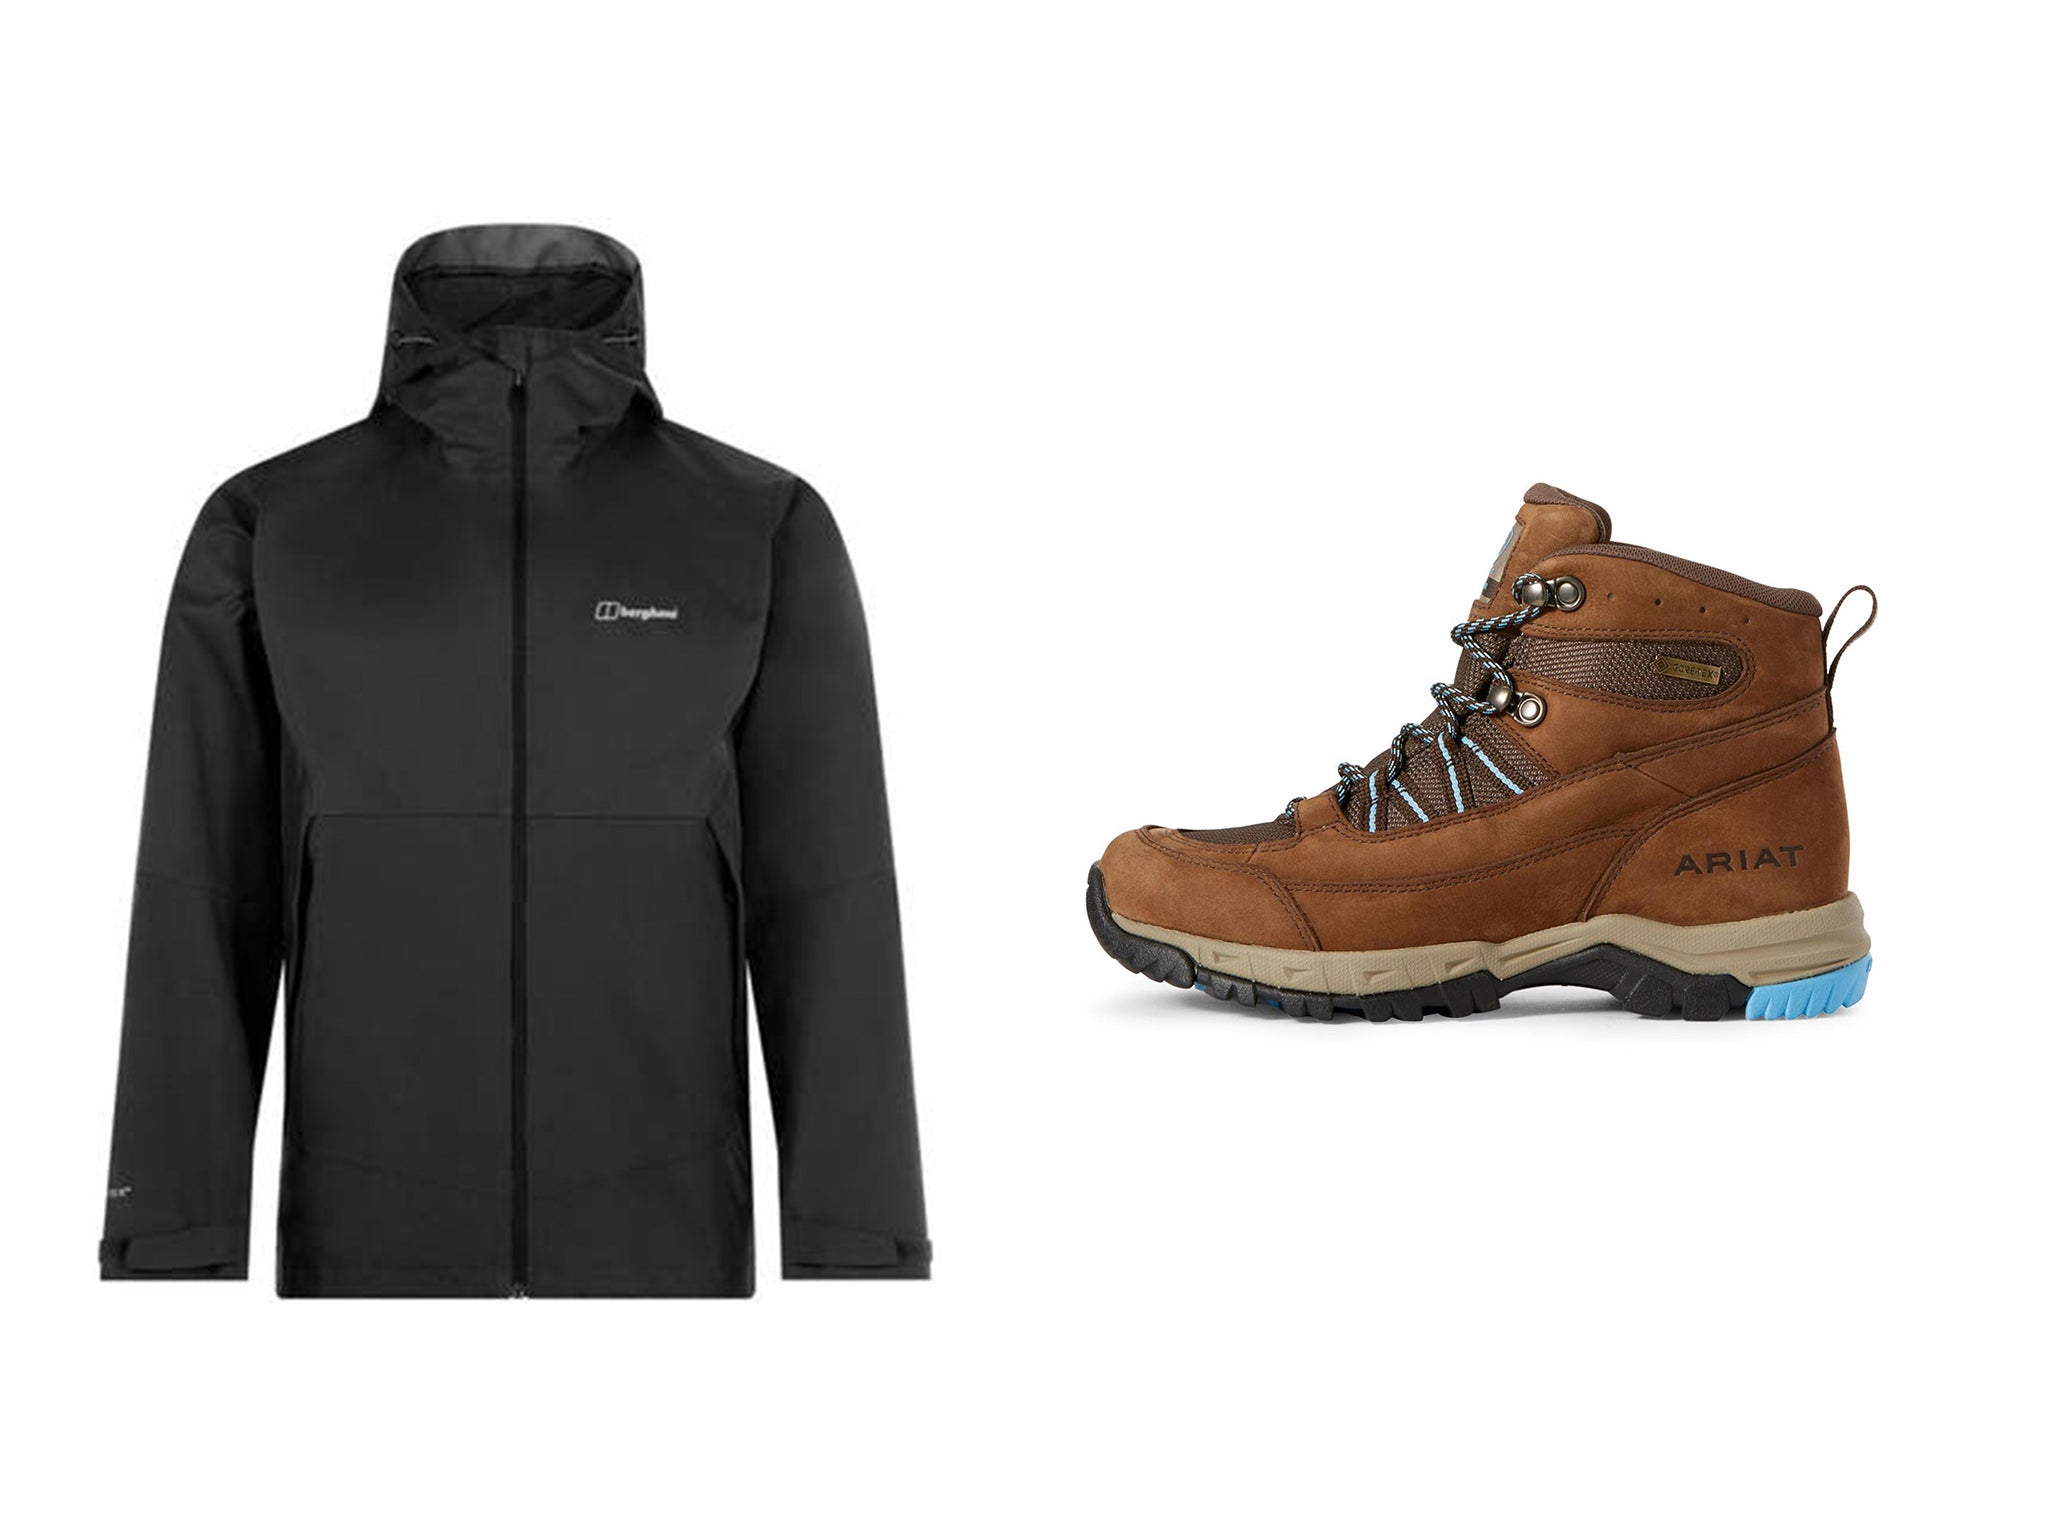 If you want to go hiking, make sure you have the best shoes and layering pieces to keep you dry